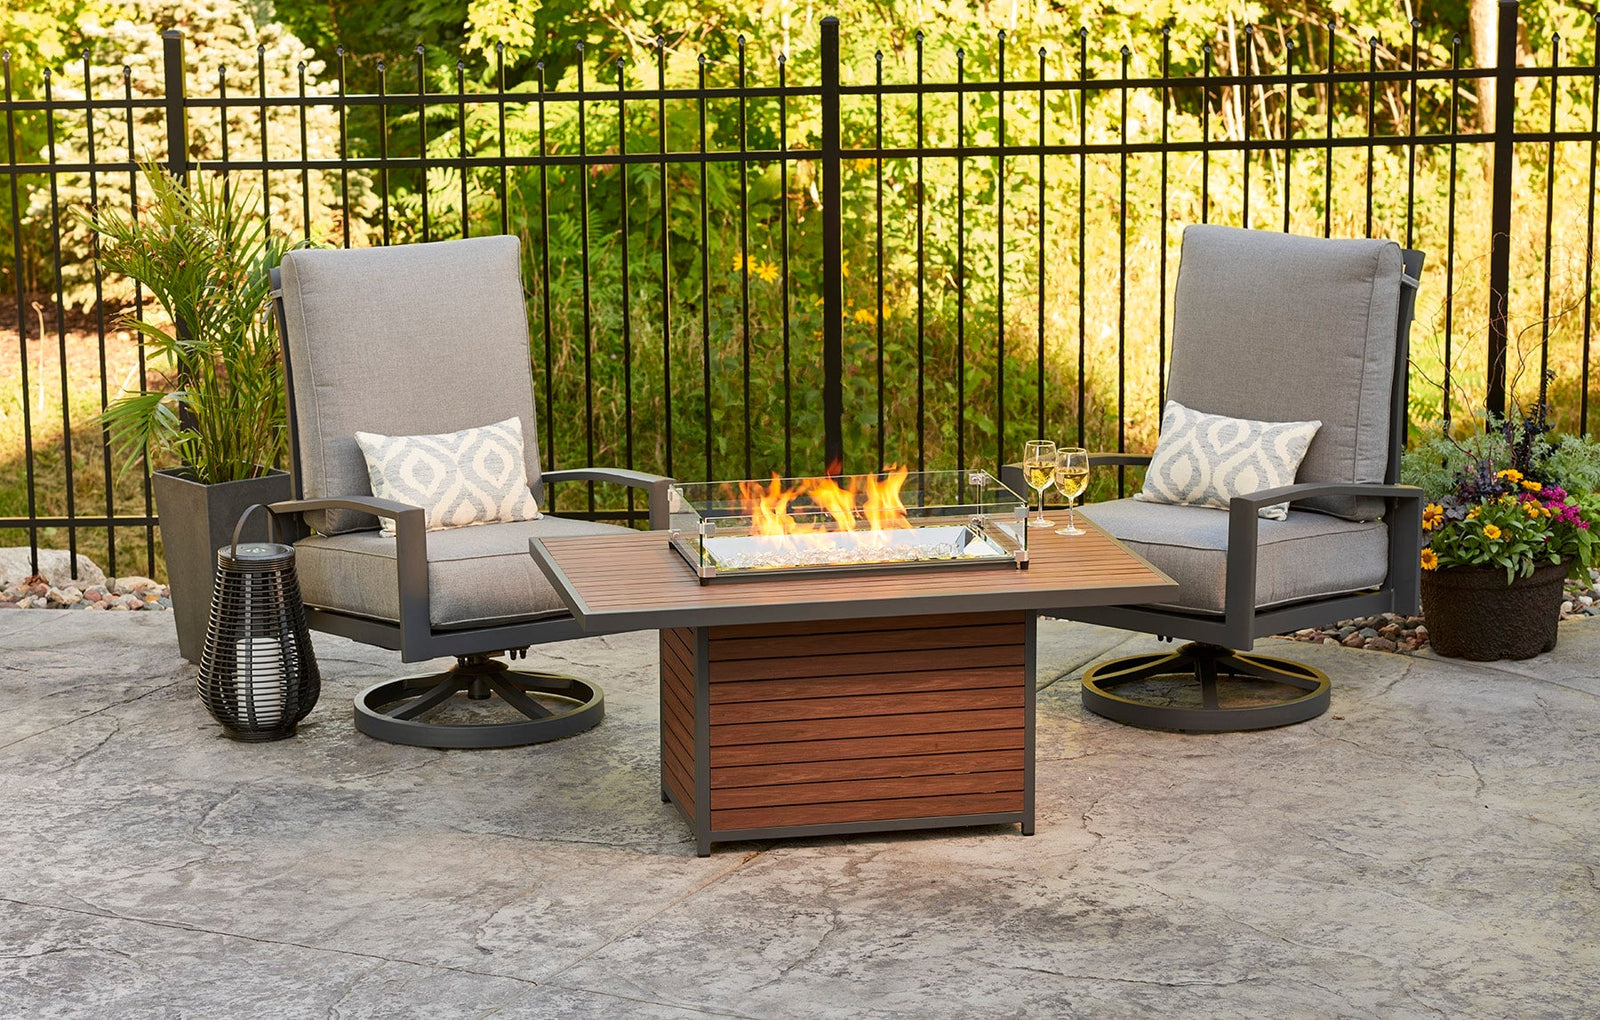 Fire Pits for Small Backyard Spaces